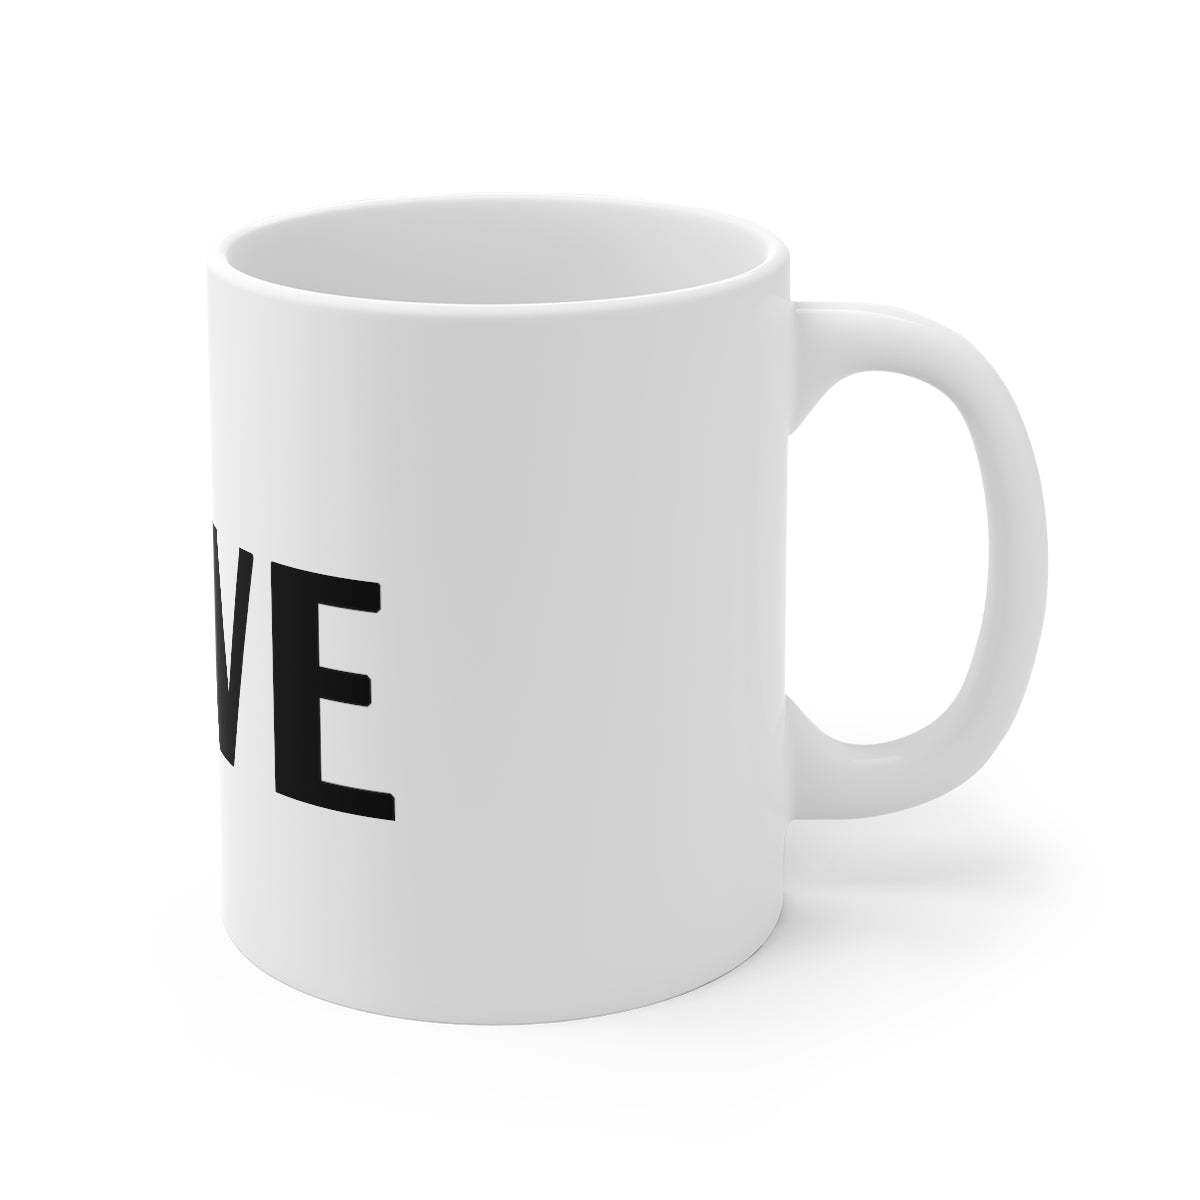 Cat Love Mug | Cat Lover's Mug | Perfect gift for the cat lover in your family! | Multiple Colors Available